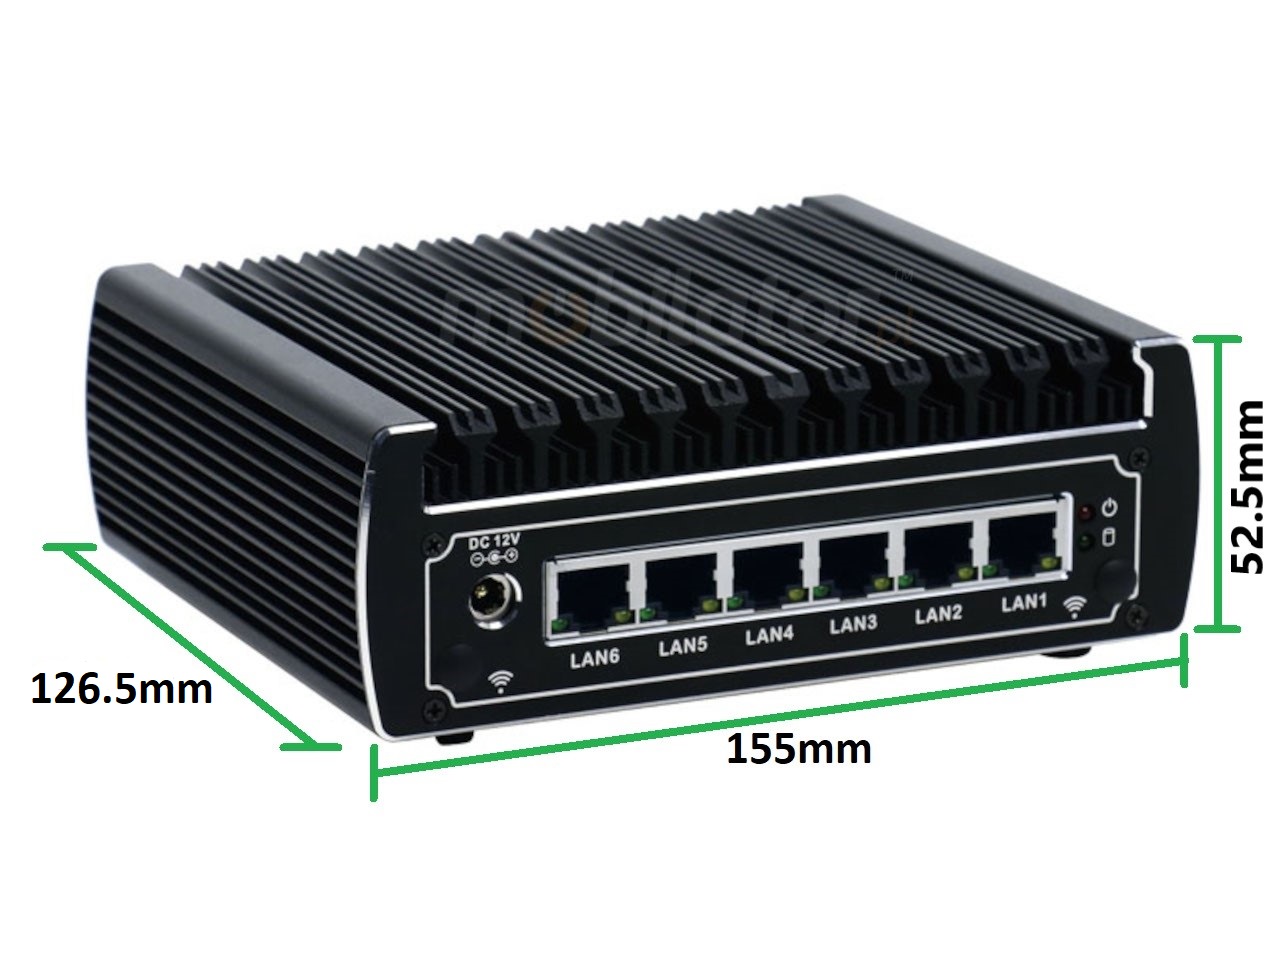  IBOX N133 v.11, size, industrial small fast reliable fanless industrial small LAN INTEL i3 SSD DDR4 